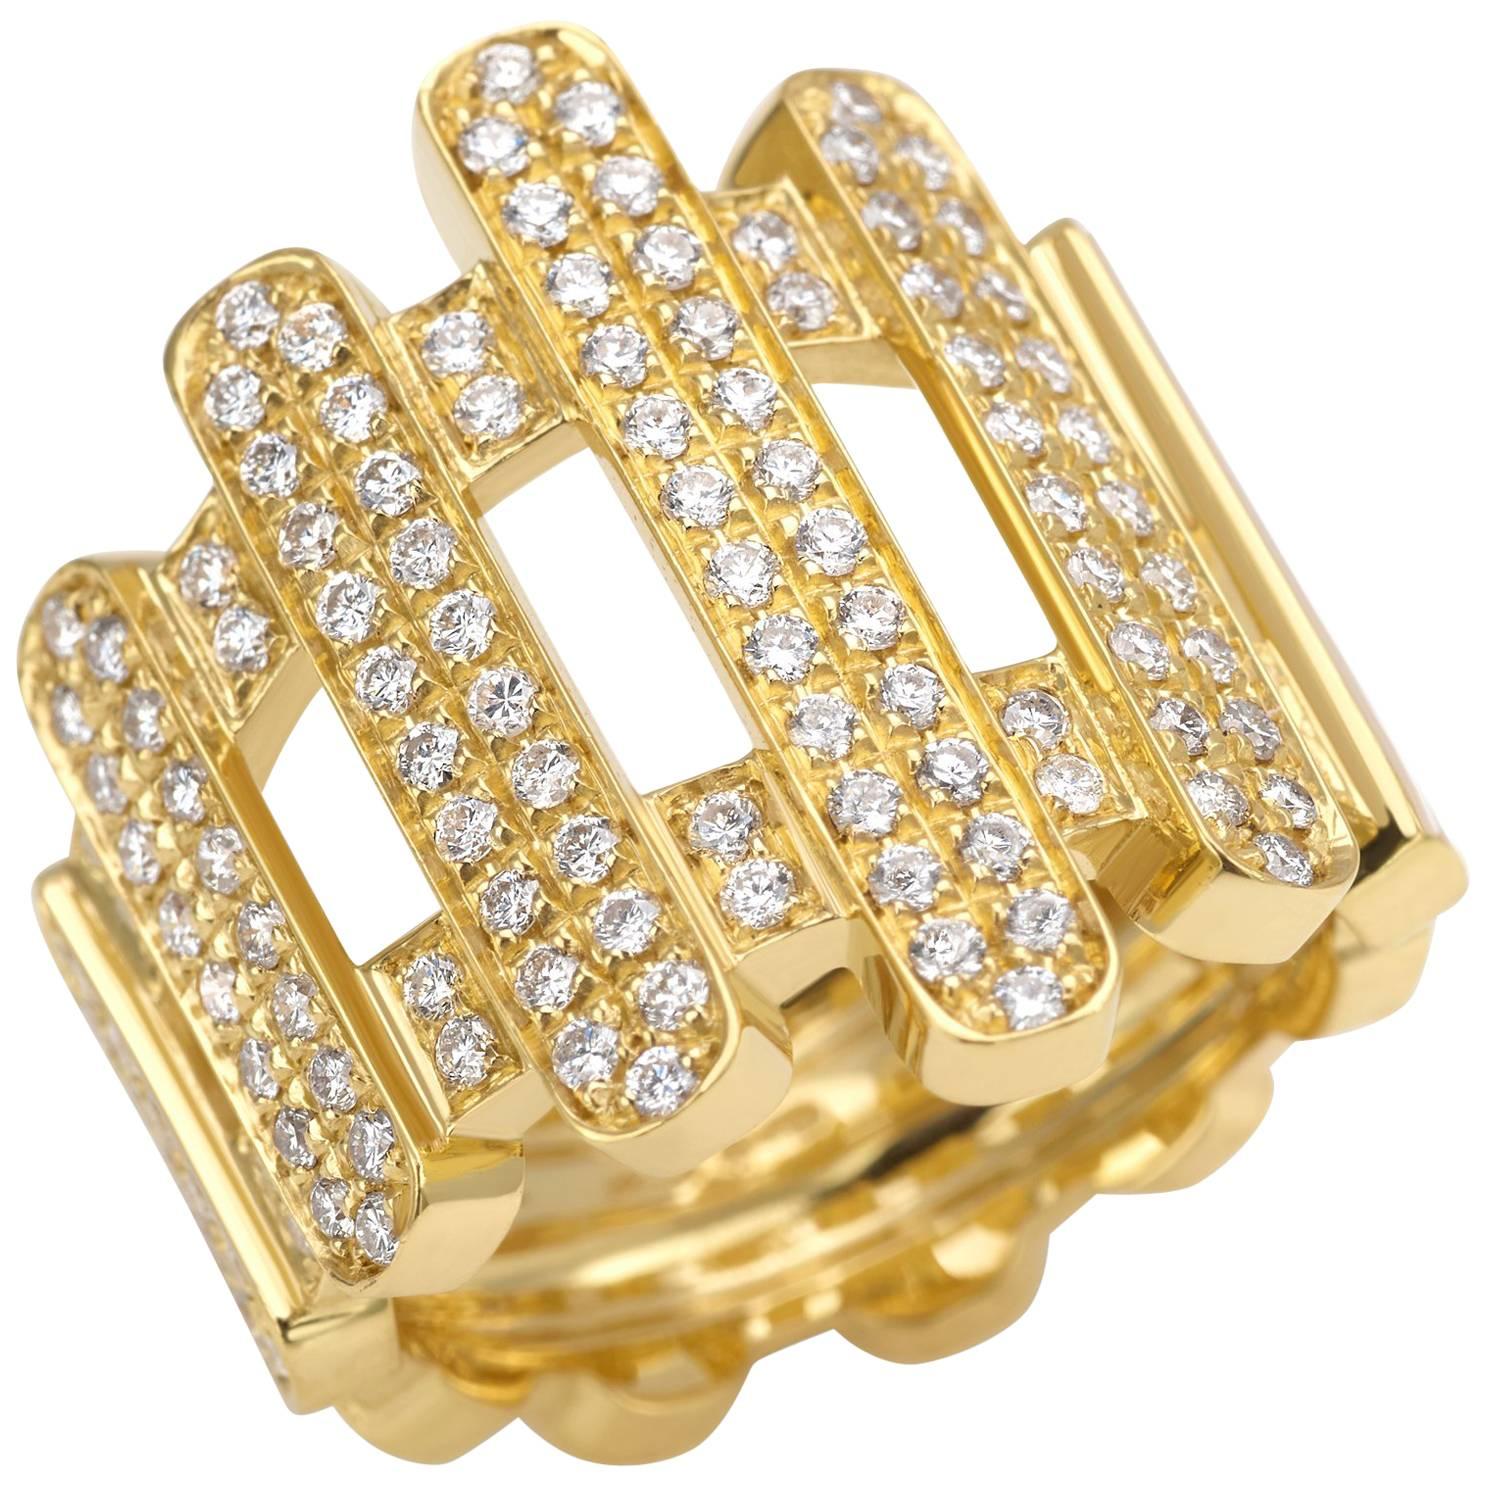 Ring from the Collection "Moonlight" 18 Karat Yellow Gold and Diamonds For Sale